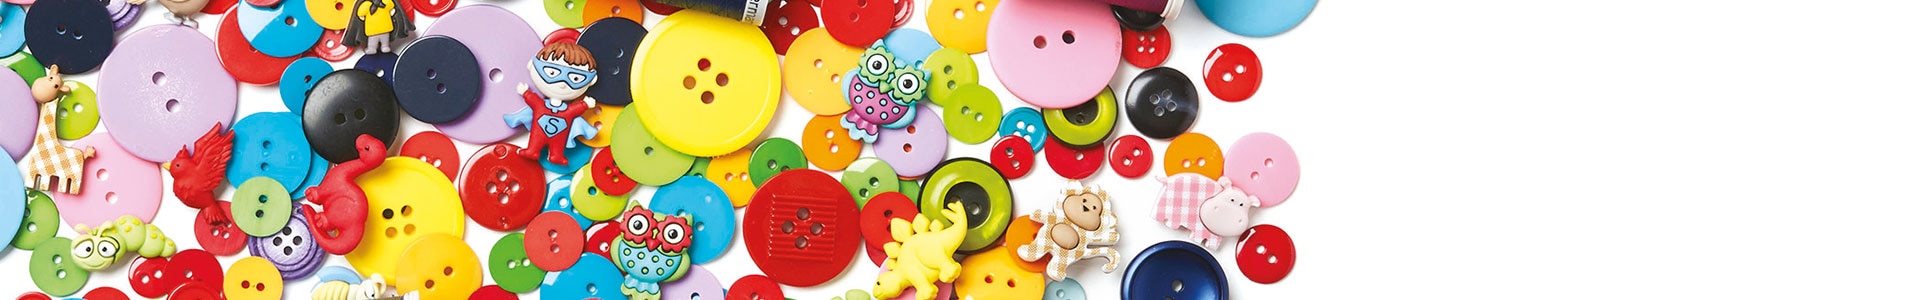 Grab our buttons in packs of various shapes, colors & sizes for craft & sewing projects.